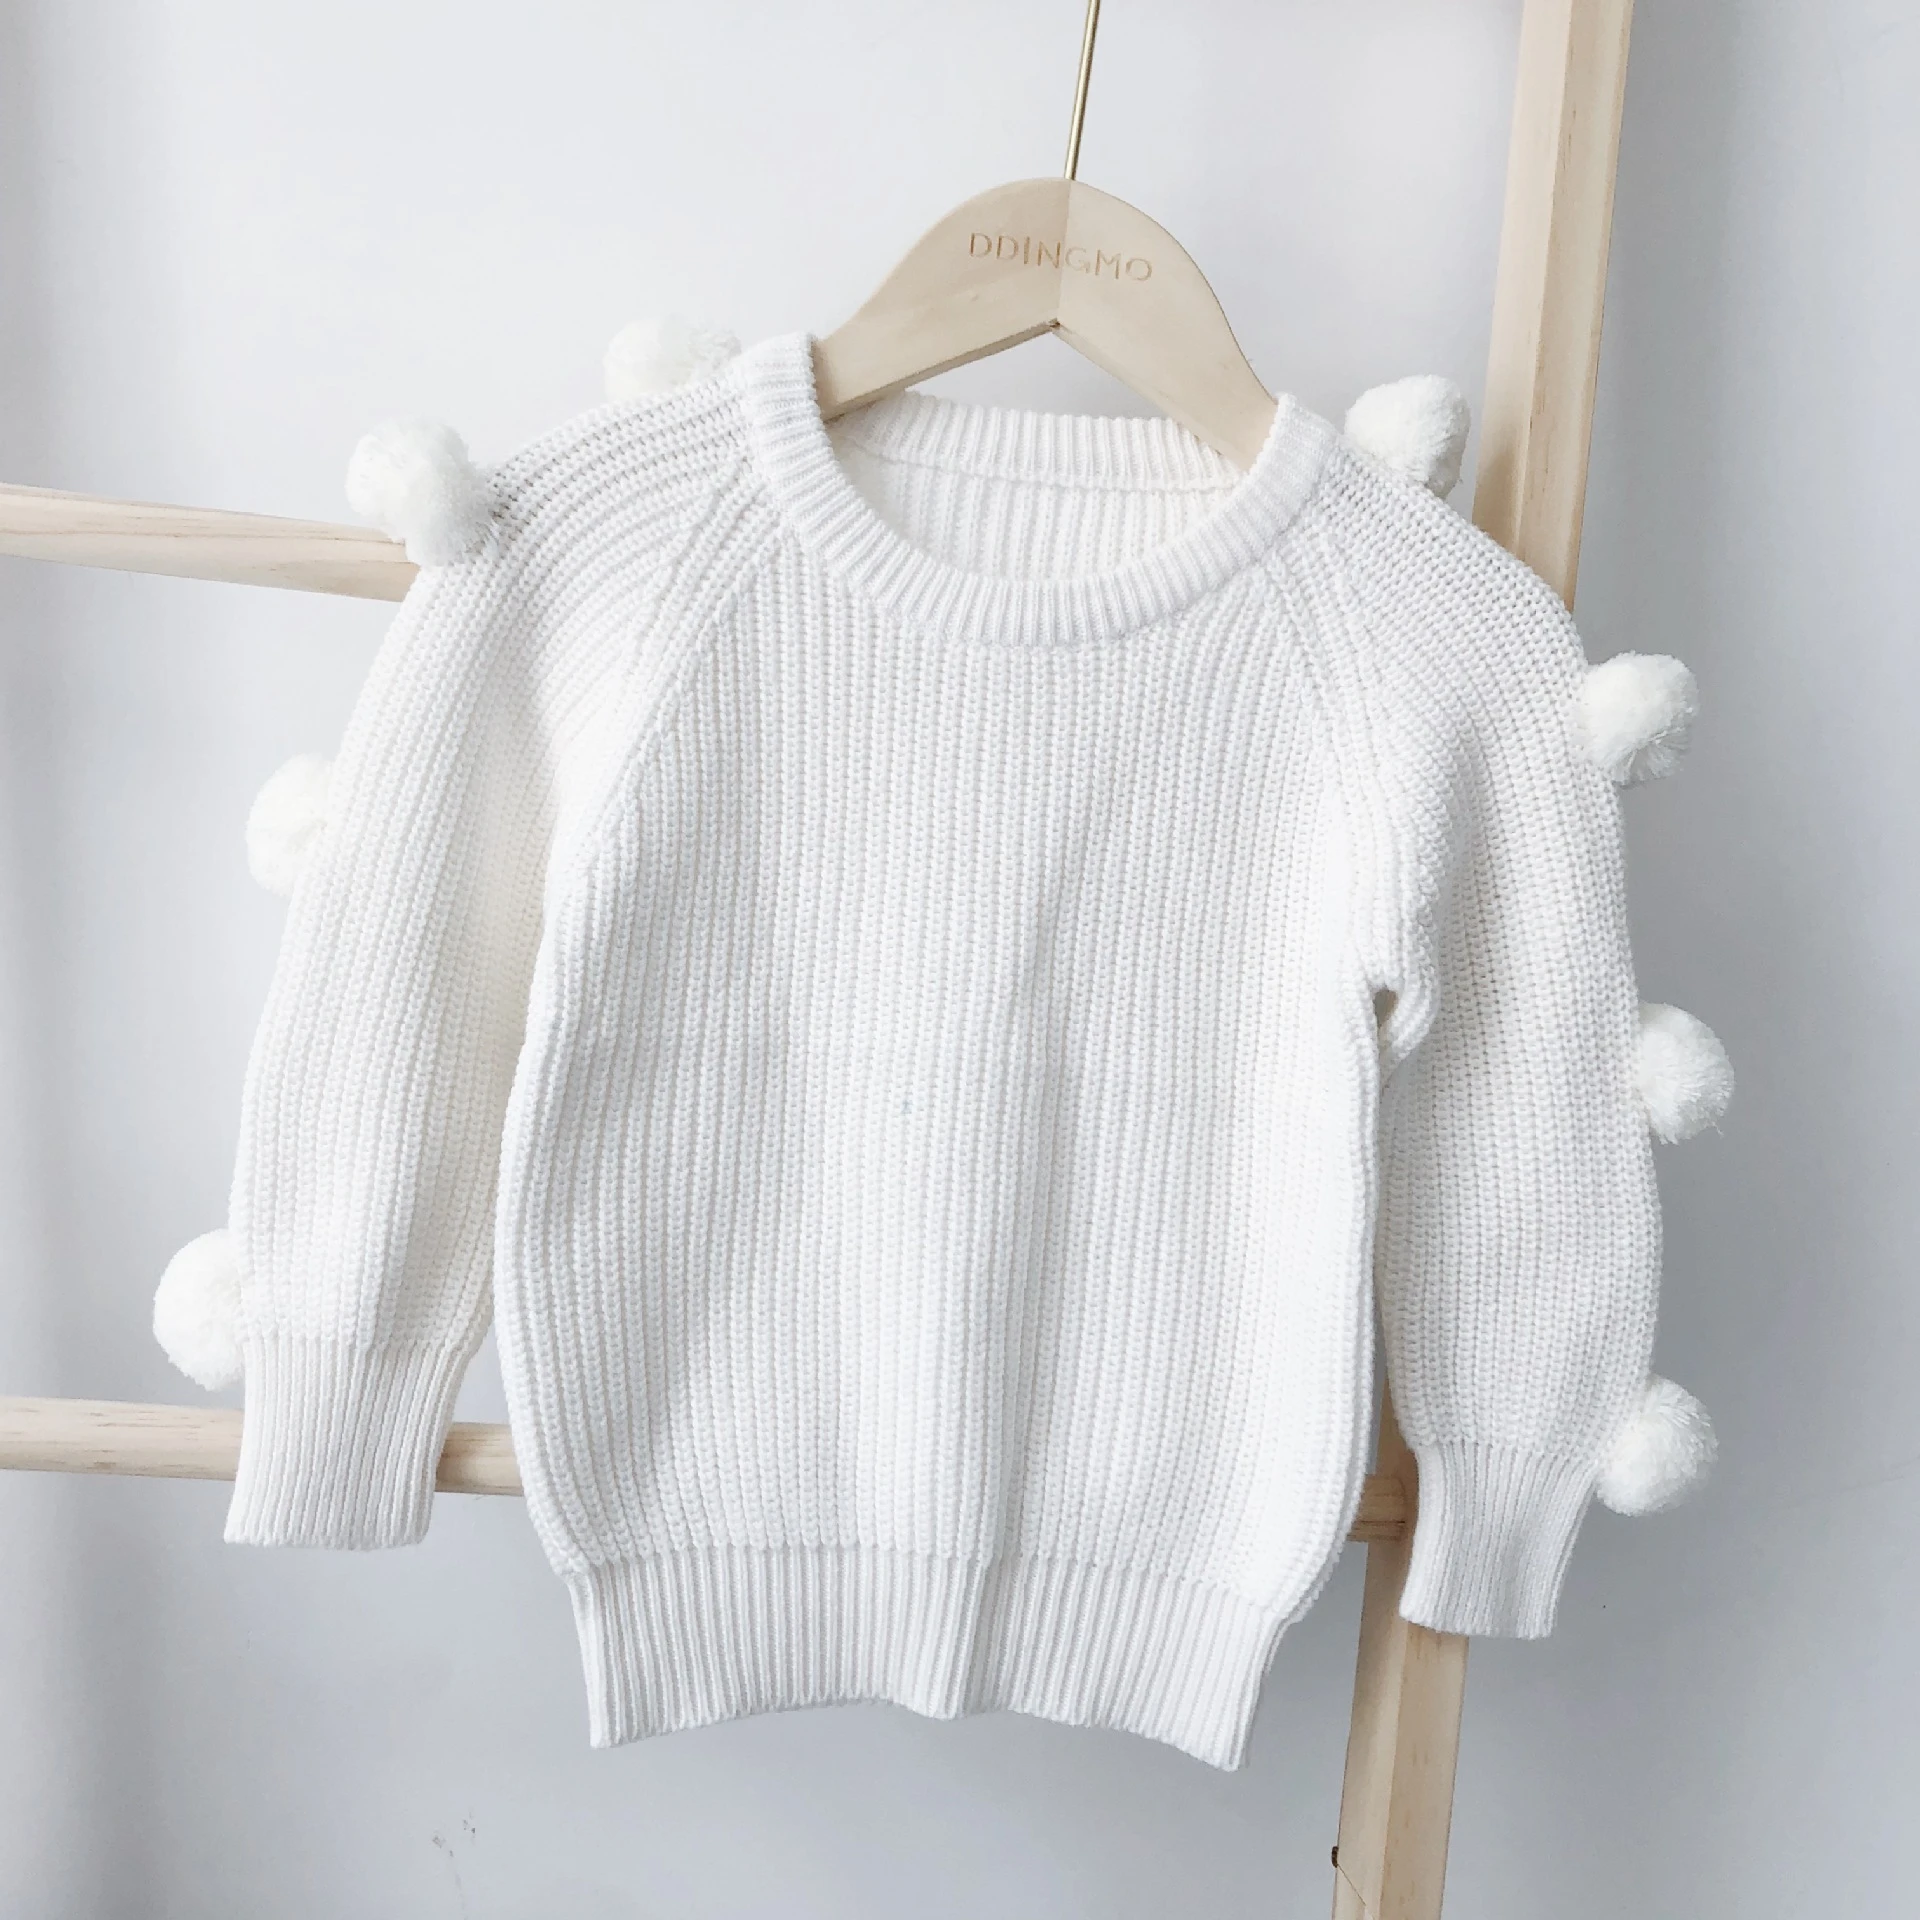 Baby Girls Boys Autumn Winter Wear 100% Cotton White Children Pullovers Outerwear Baby with Pom Sleeve|Sweaters| - AliExpress